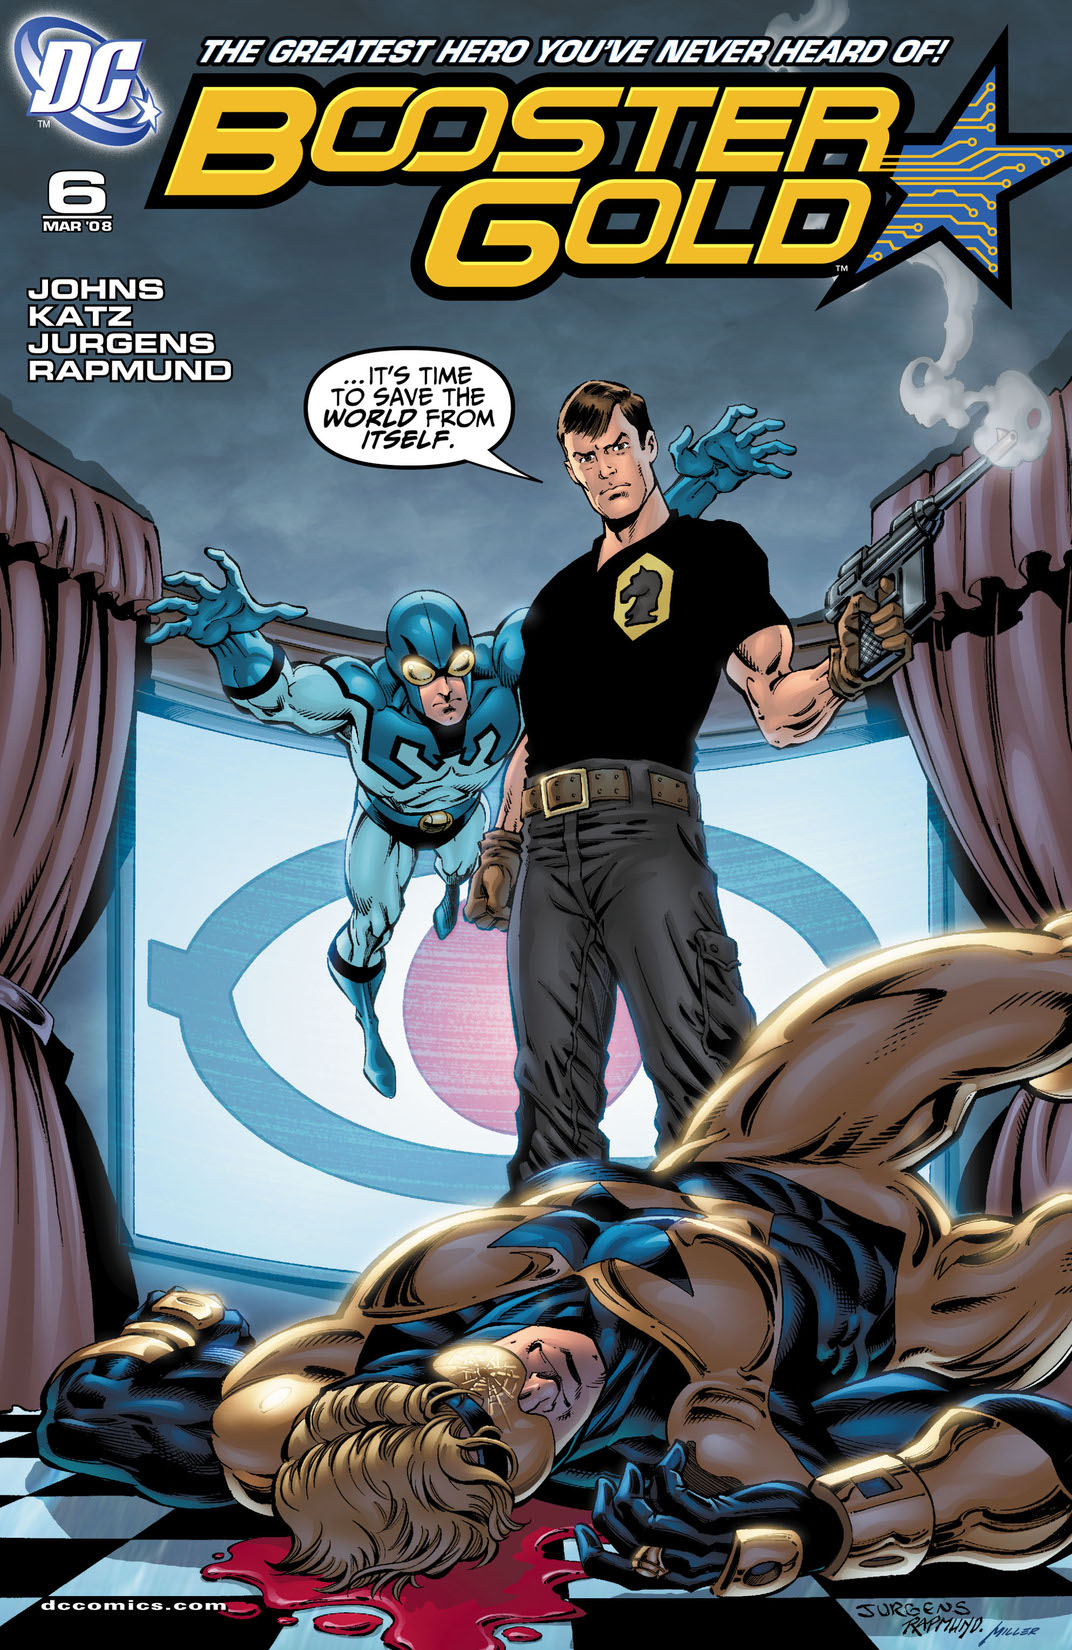 Booster Gold (2007-) #6 preview images